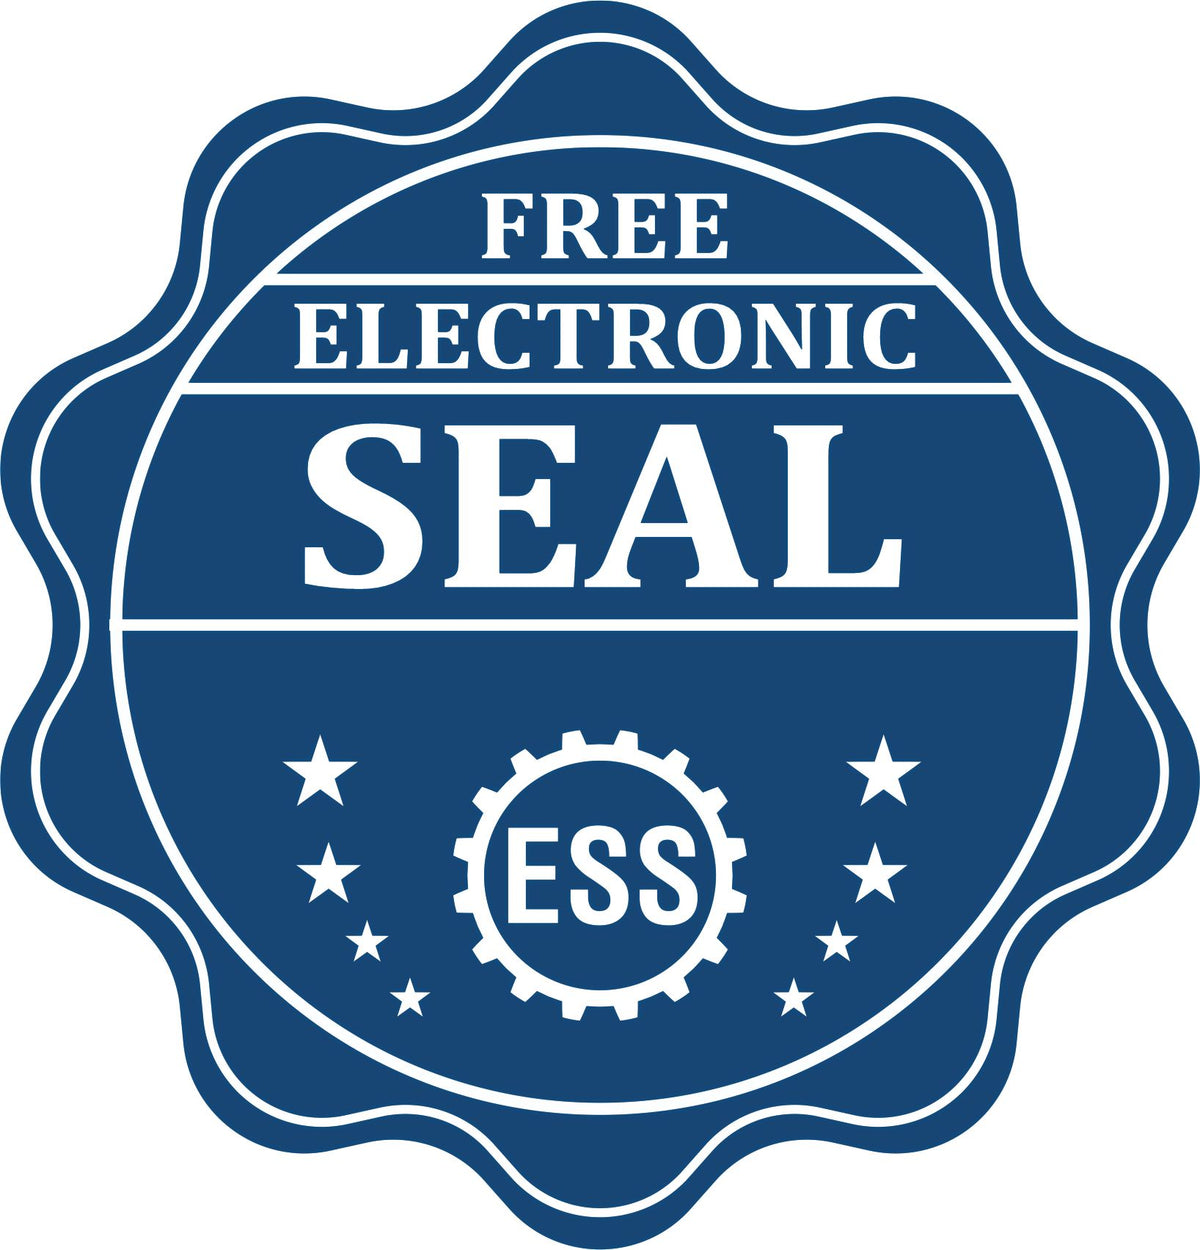 A badge showing a free electronic seal for the Gift Alaska Engineer Seal with stars and the ESS gear on the emblem.